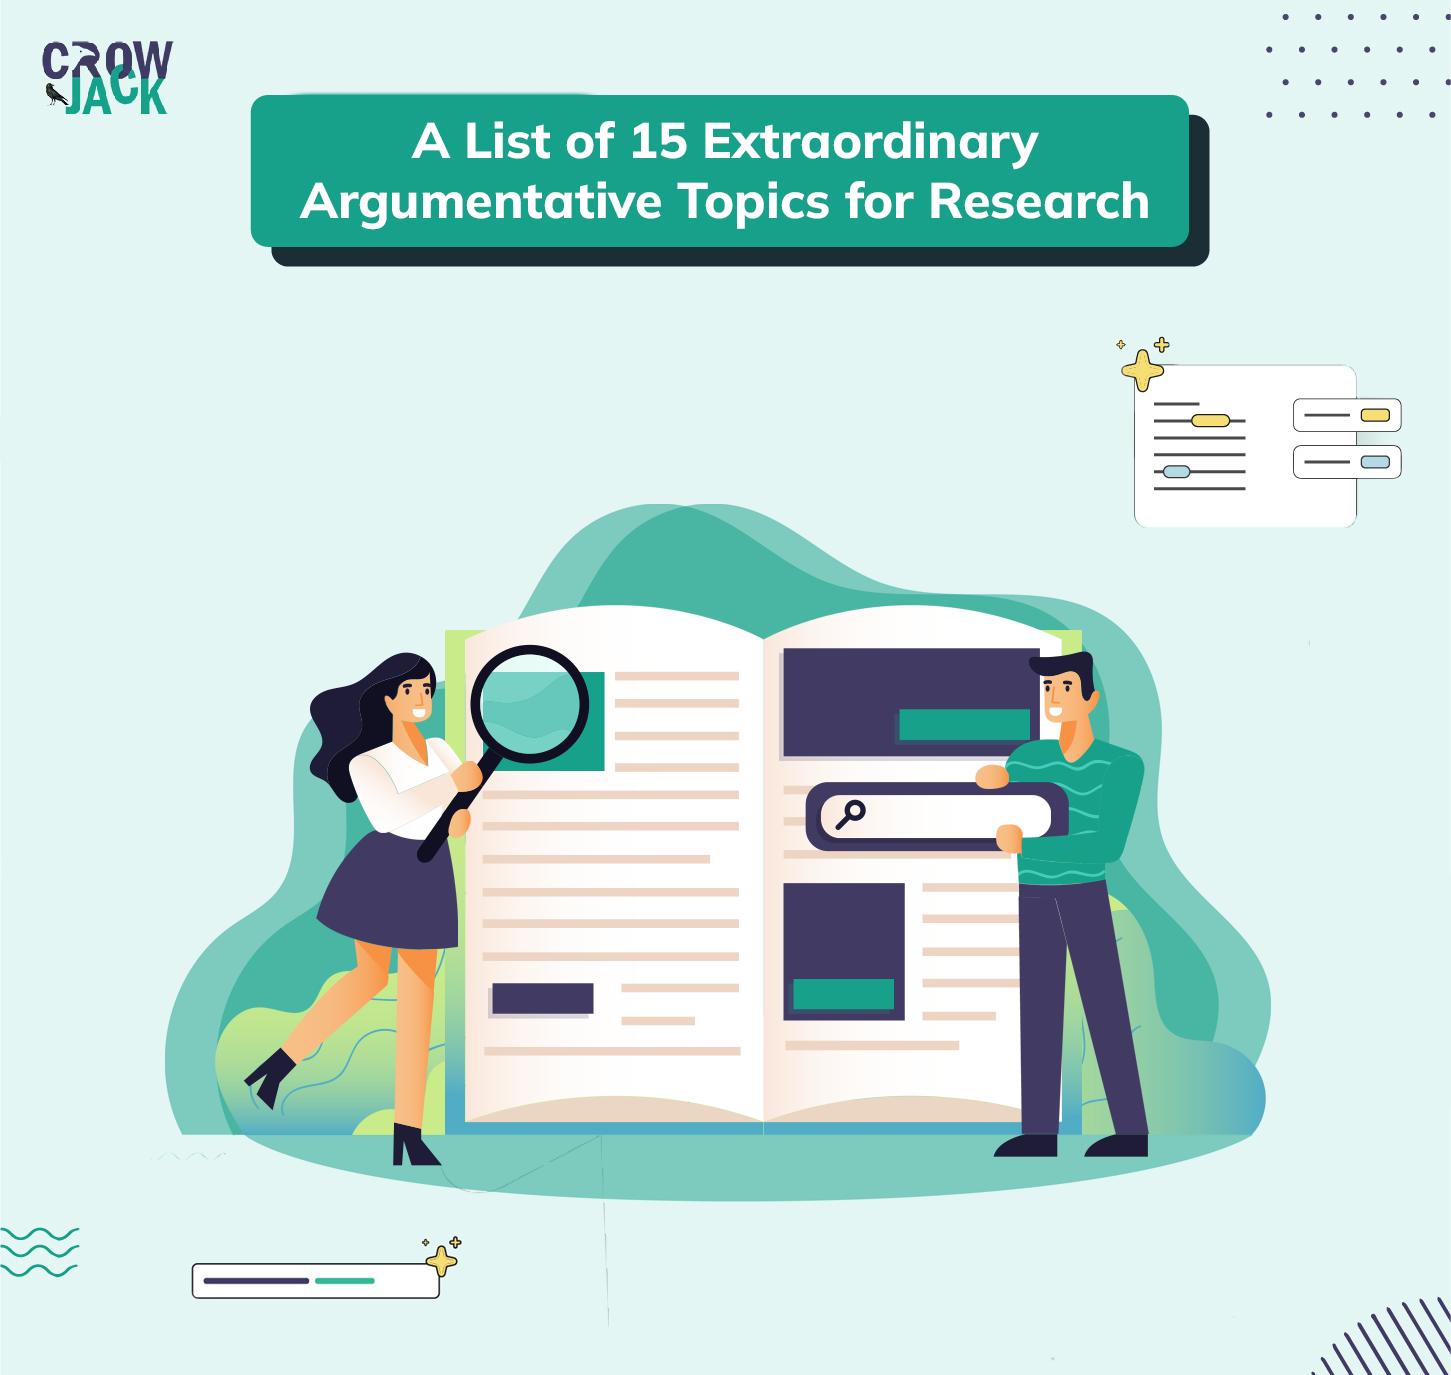 A List of 15 Extraordinary Argumentative Topics for Research -Image